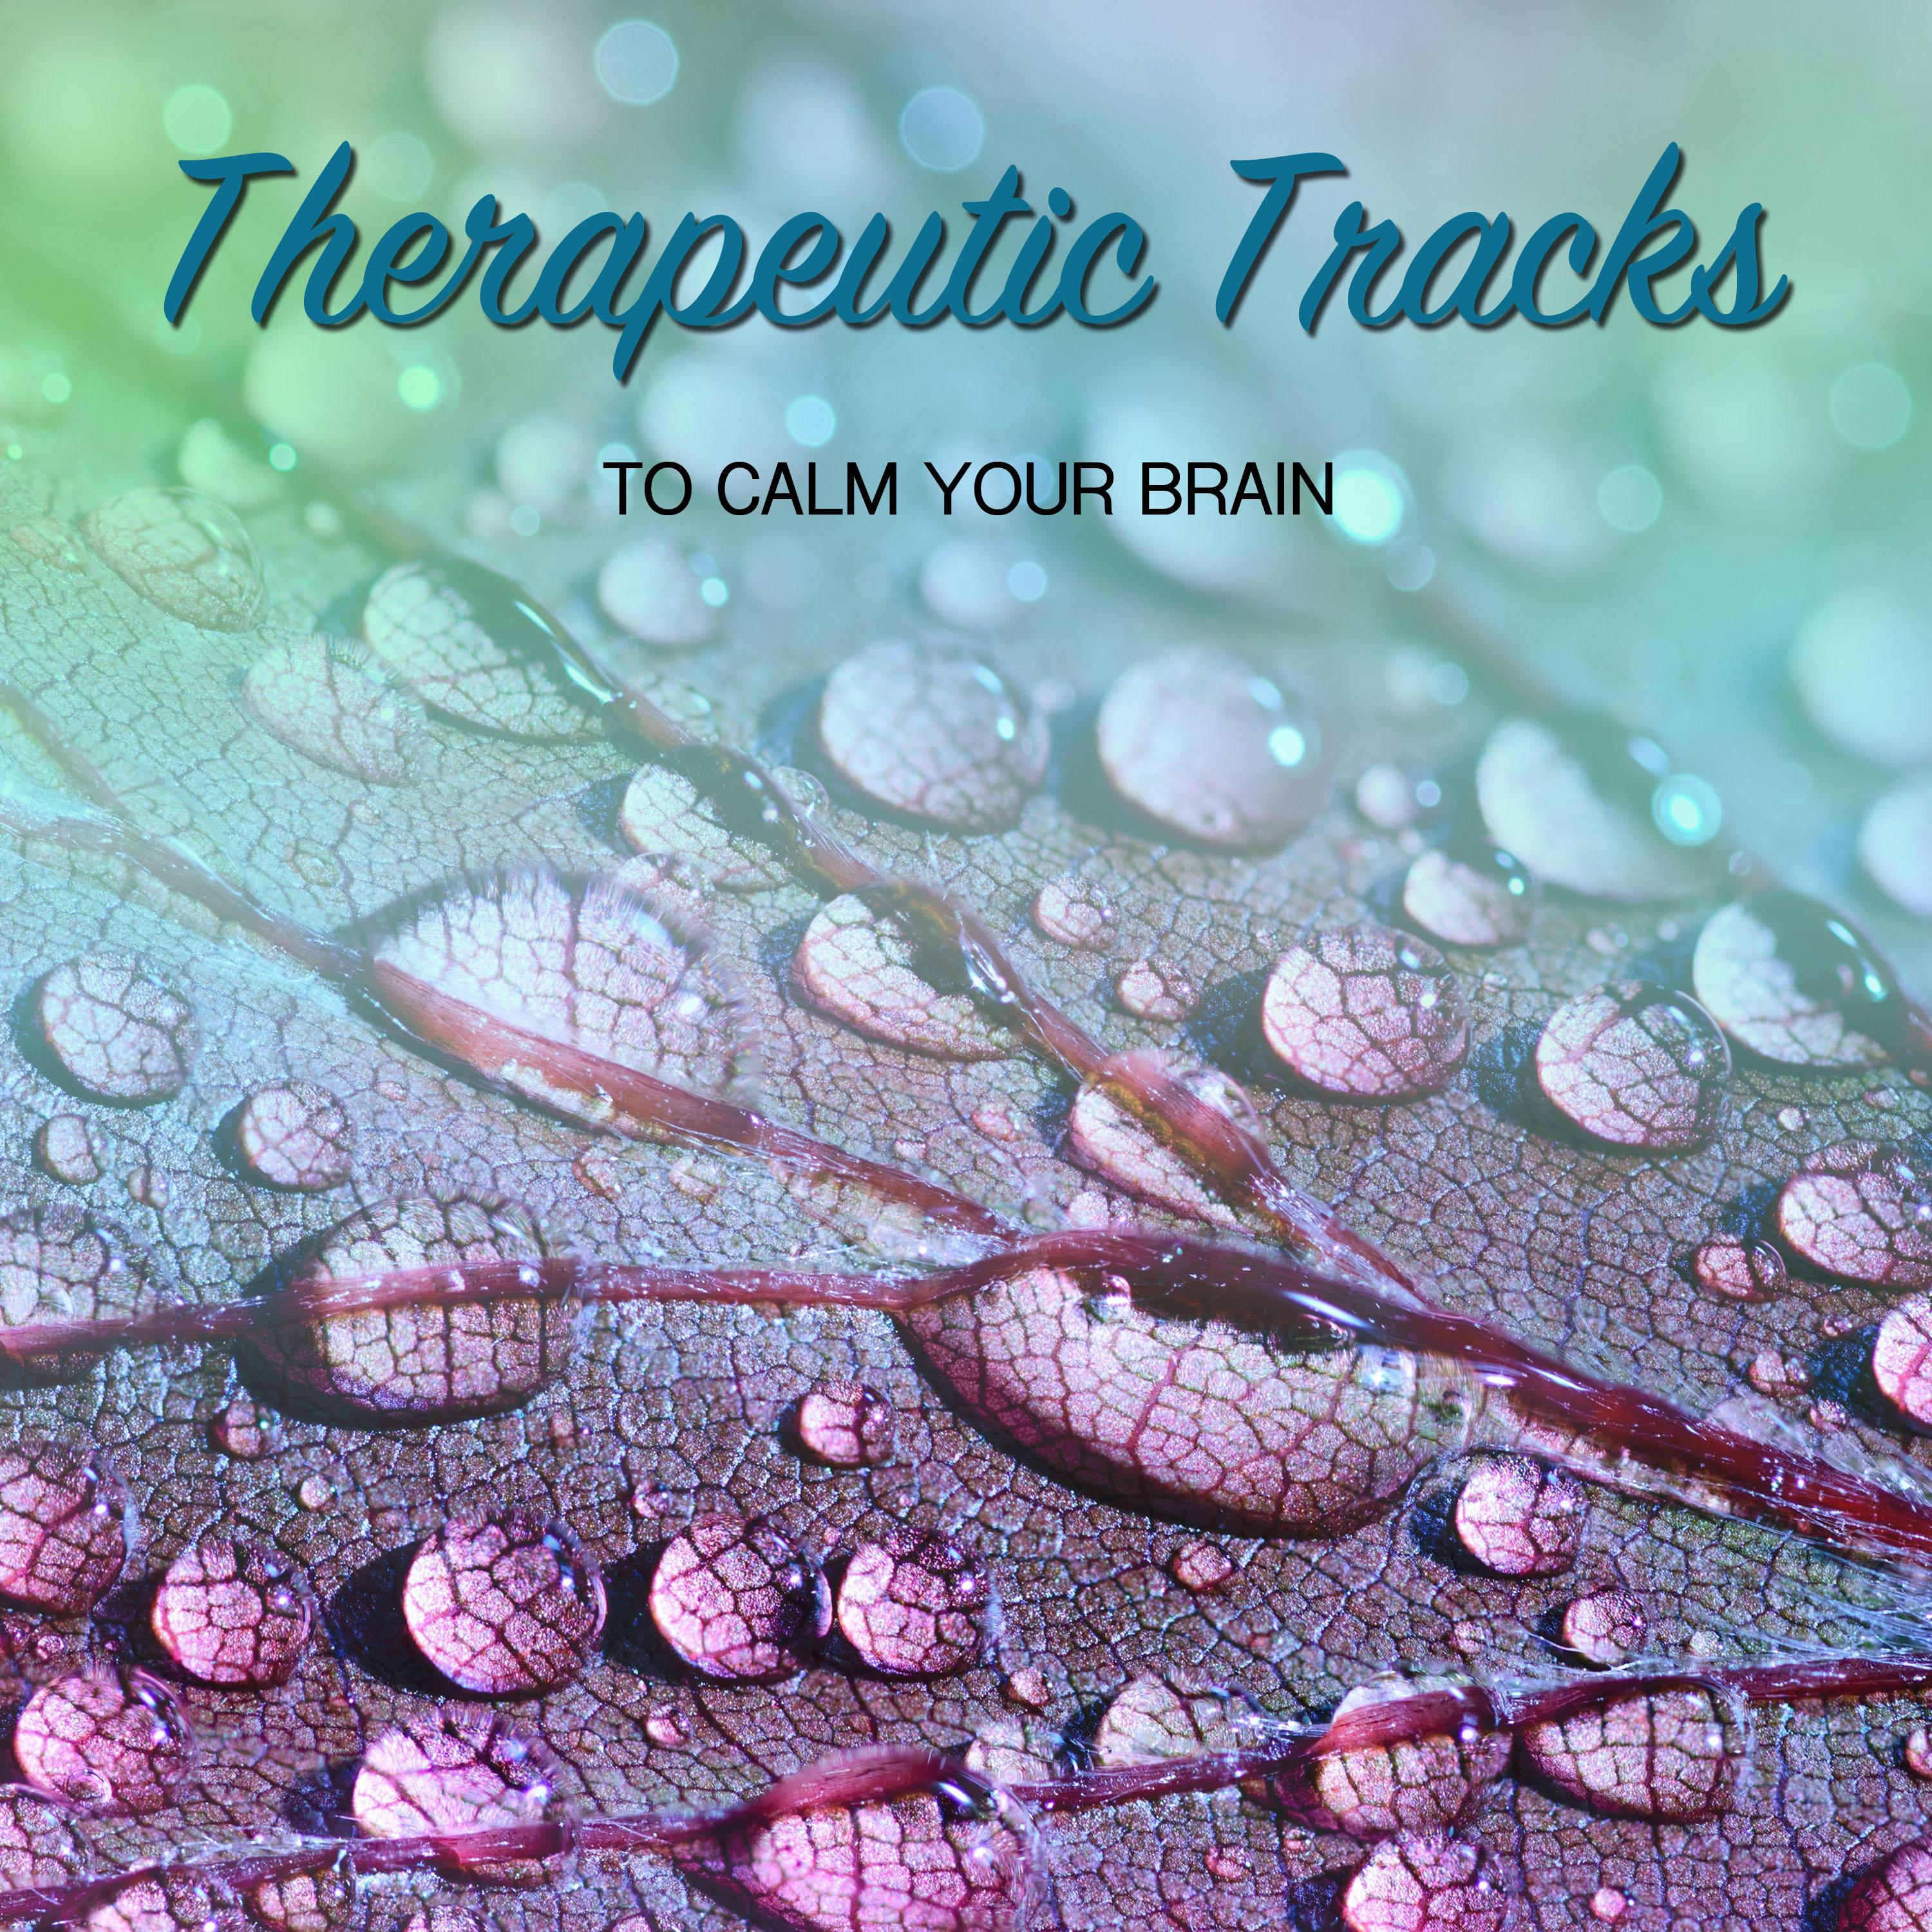 10 Therapeutic Tracks to Calm your Brain